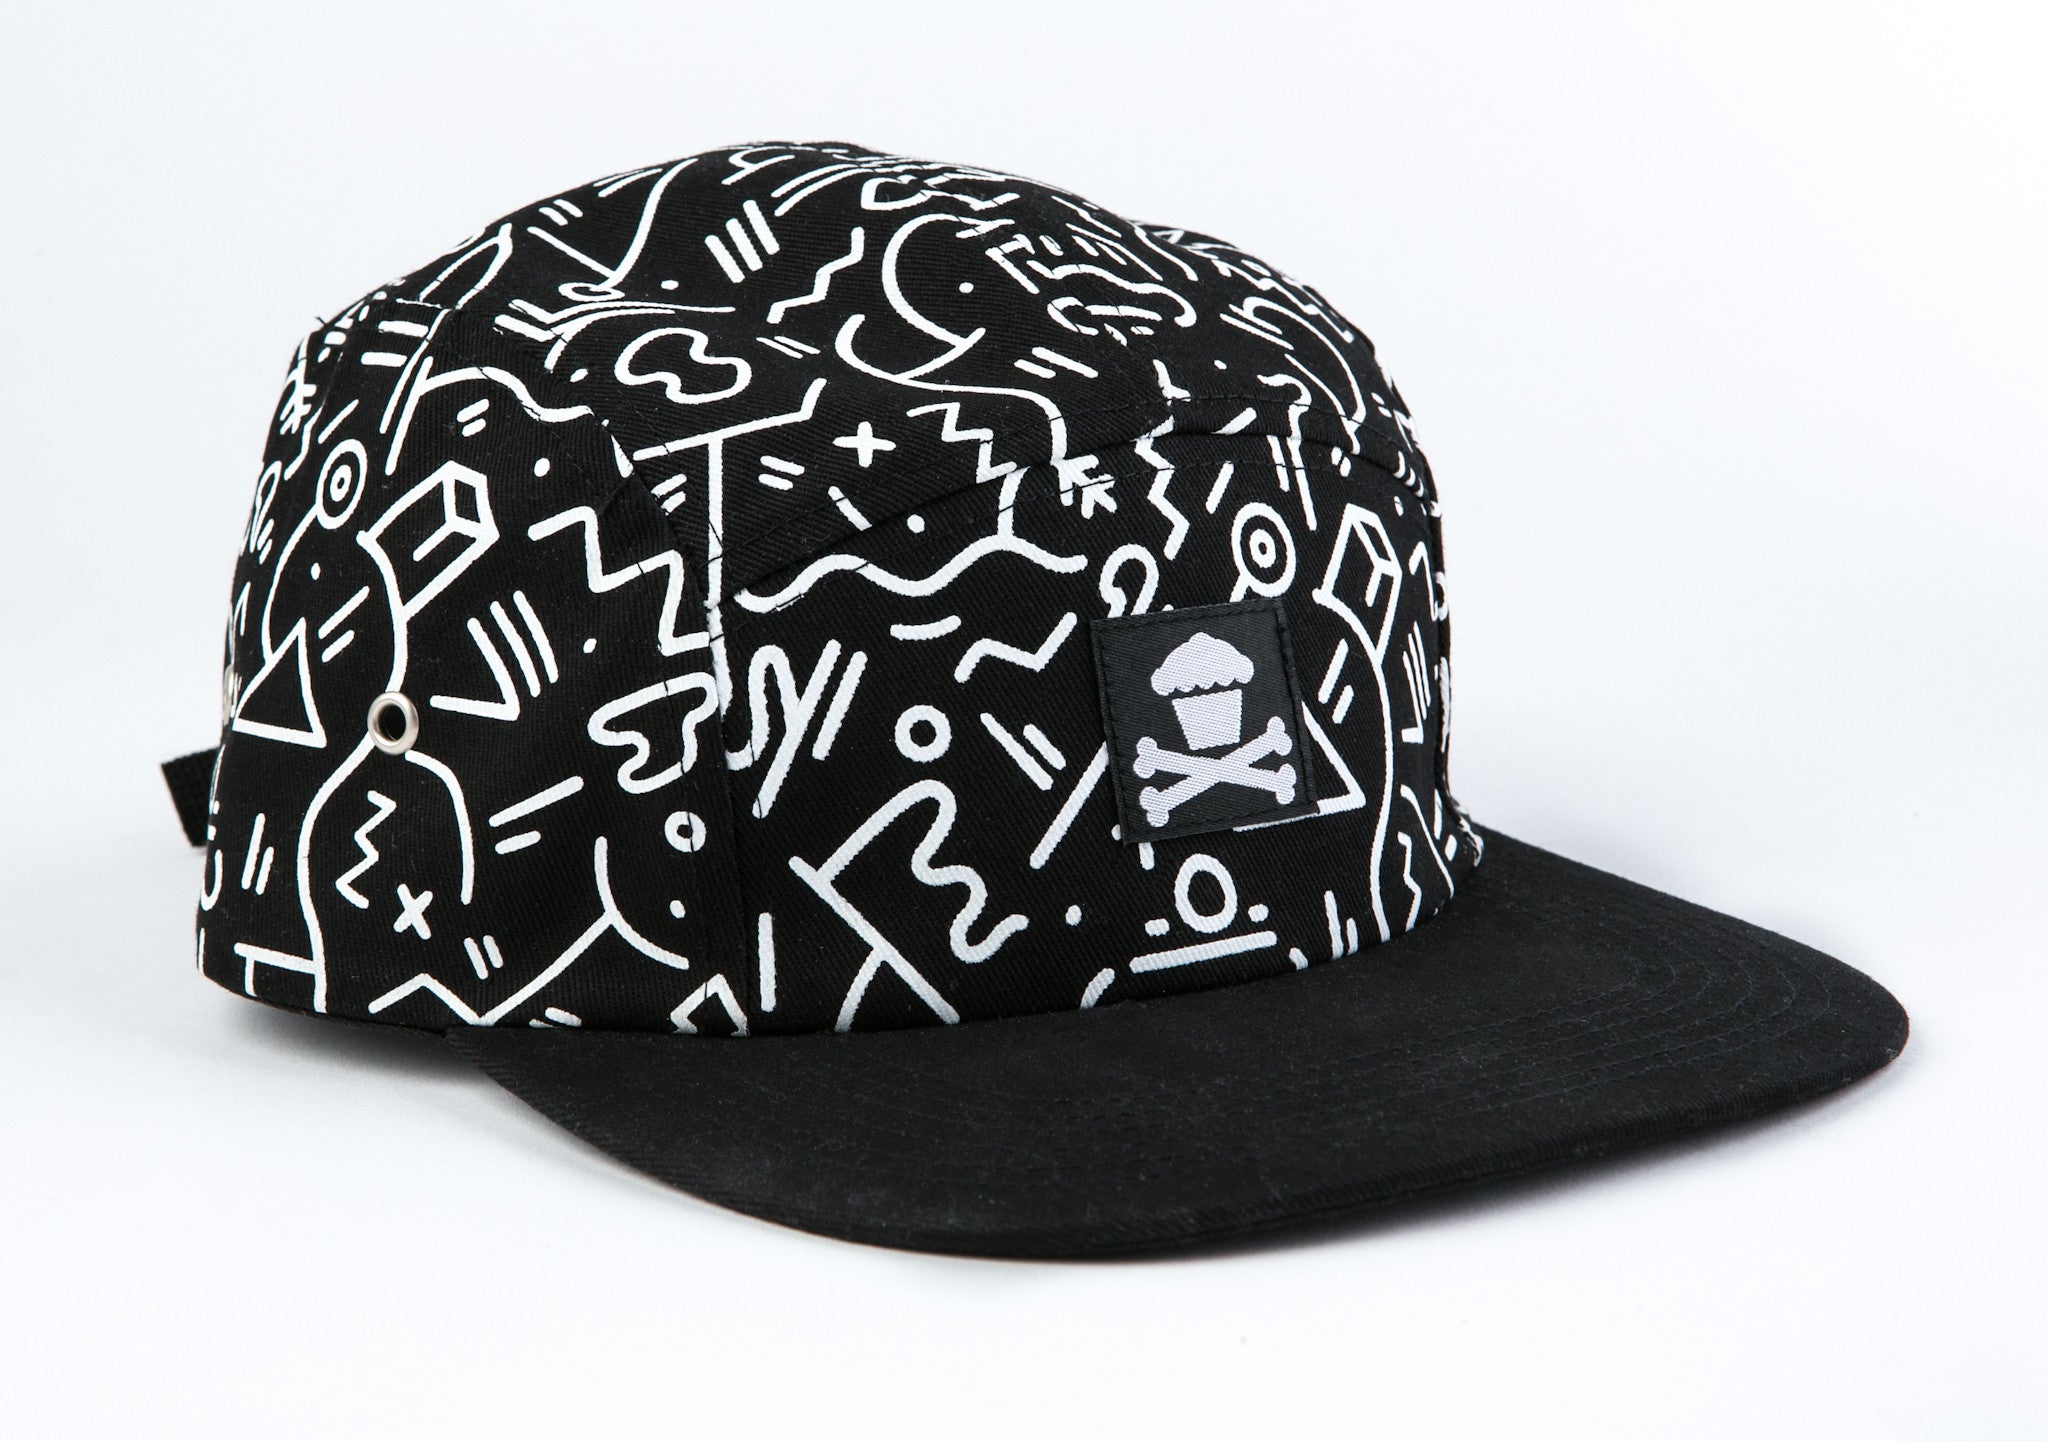 [Release May 17, 2013] Jc-zany_5_panel_hat-01